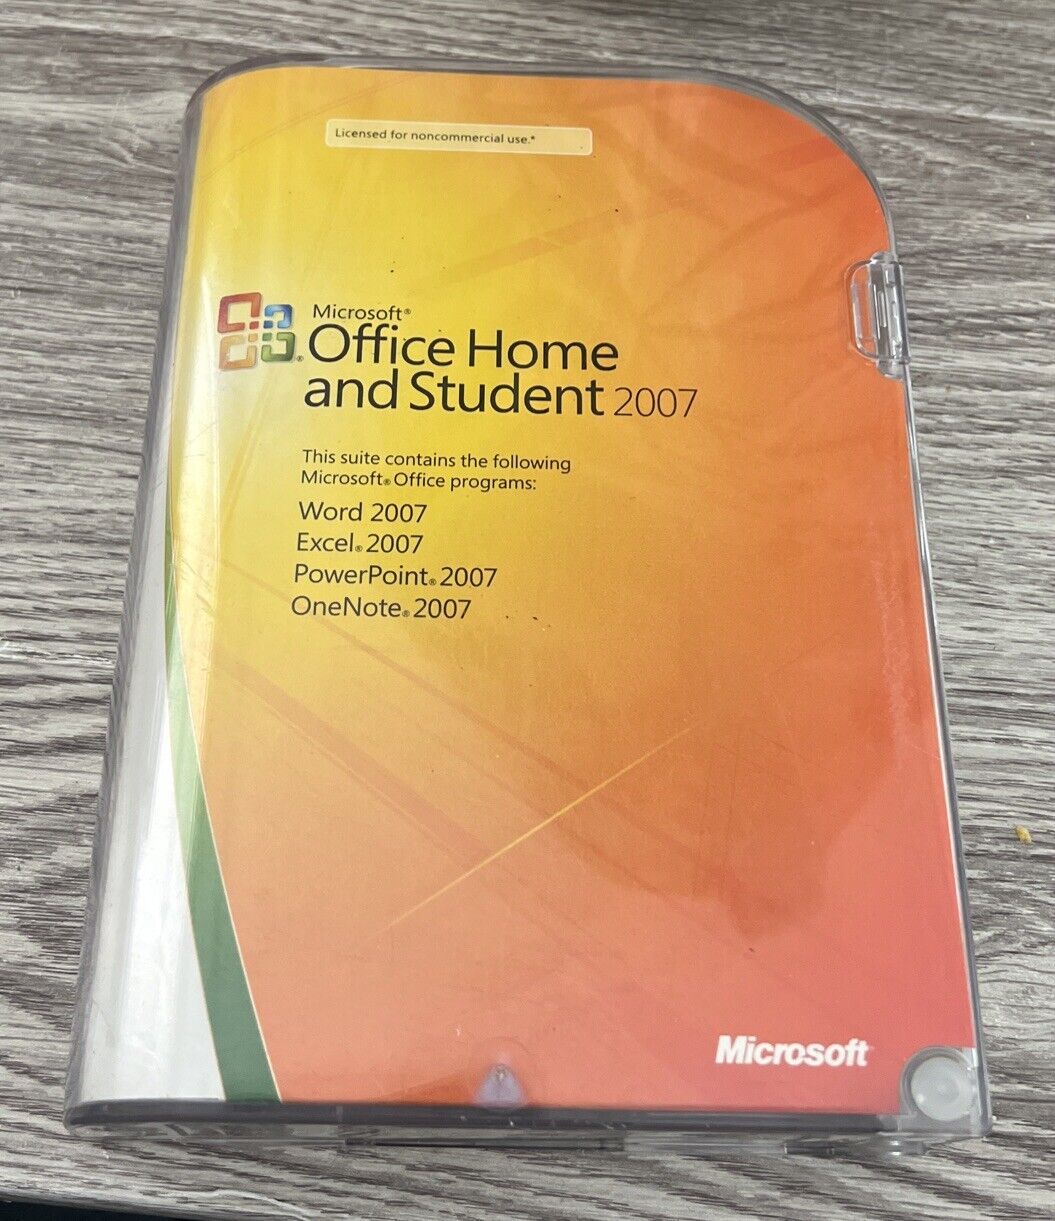 Microsoft Office 2007 Home and Student w/ Product Key - Excel, Word, PowerPoint